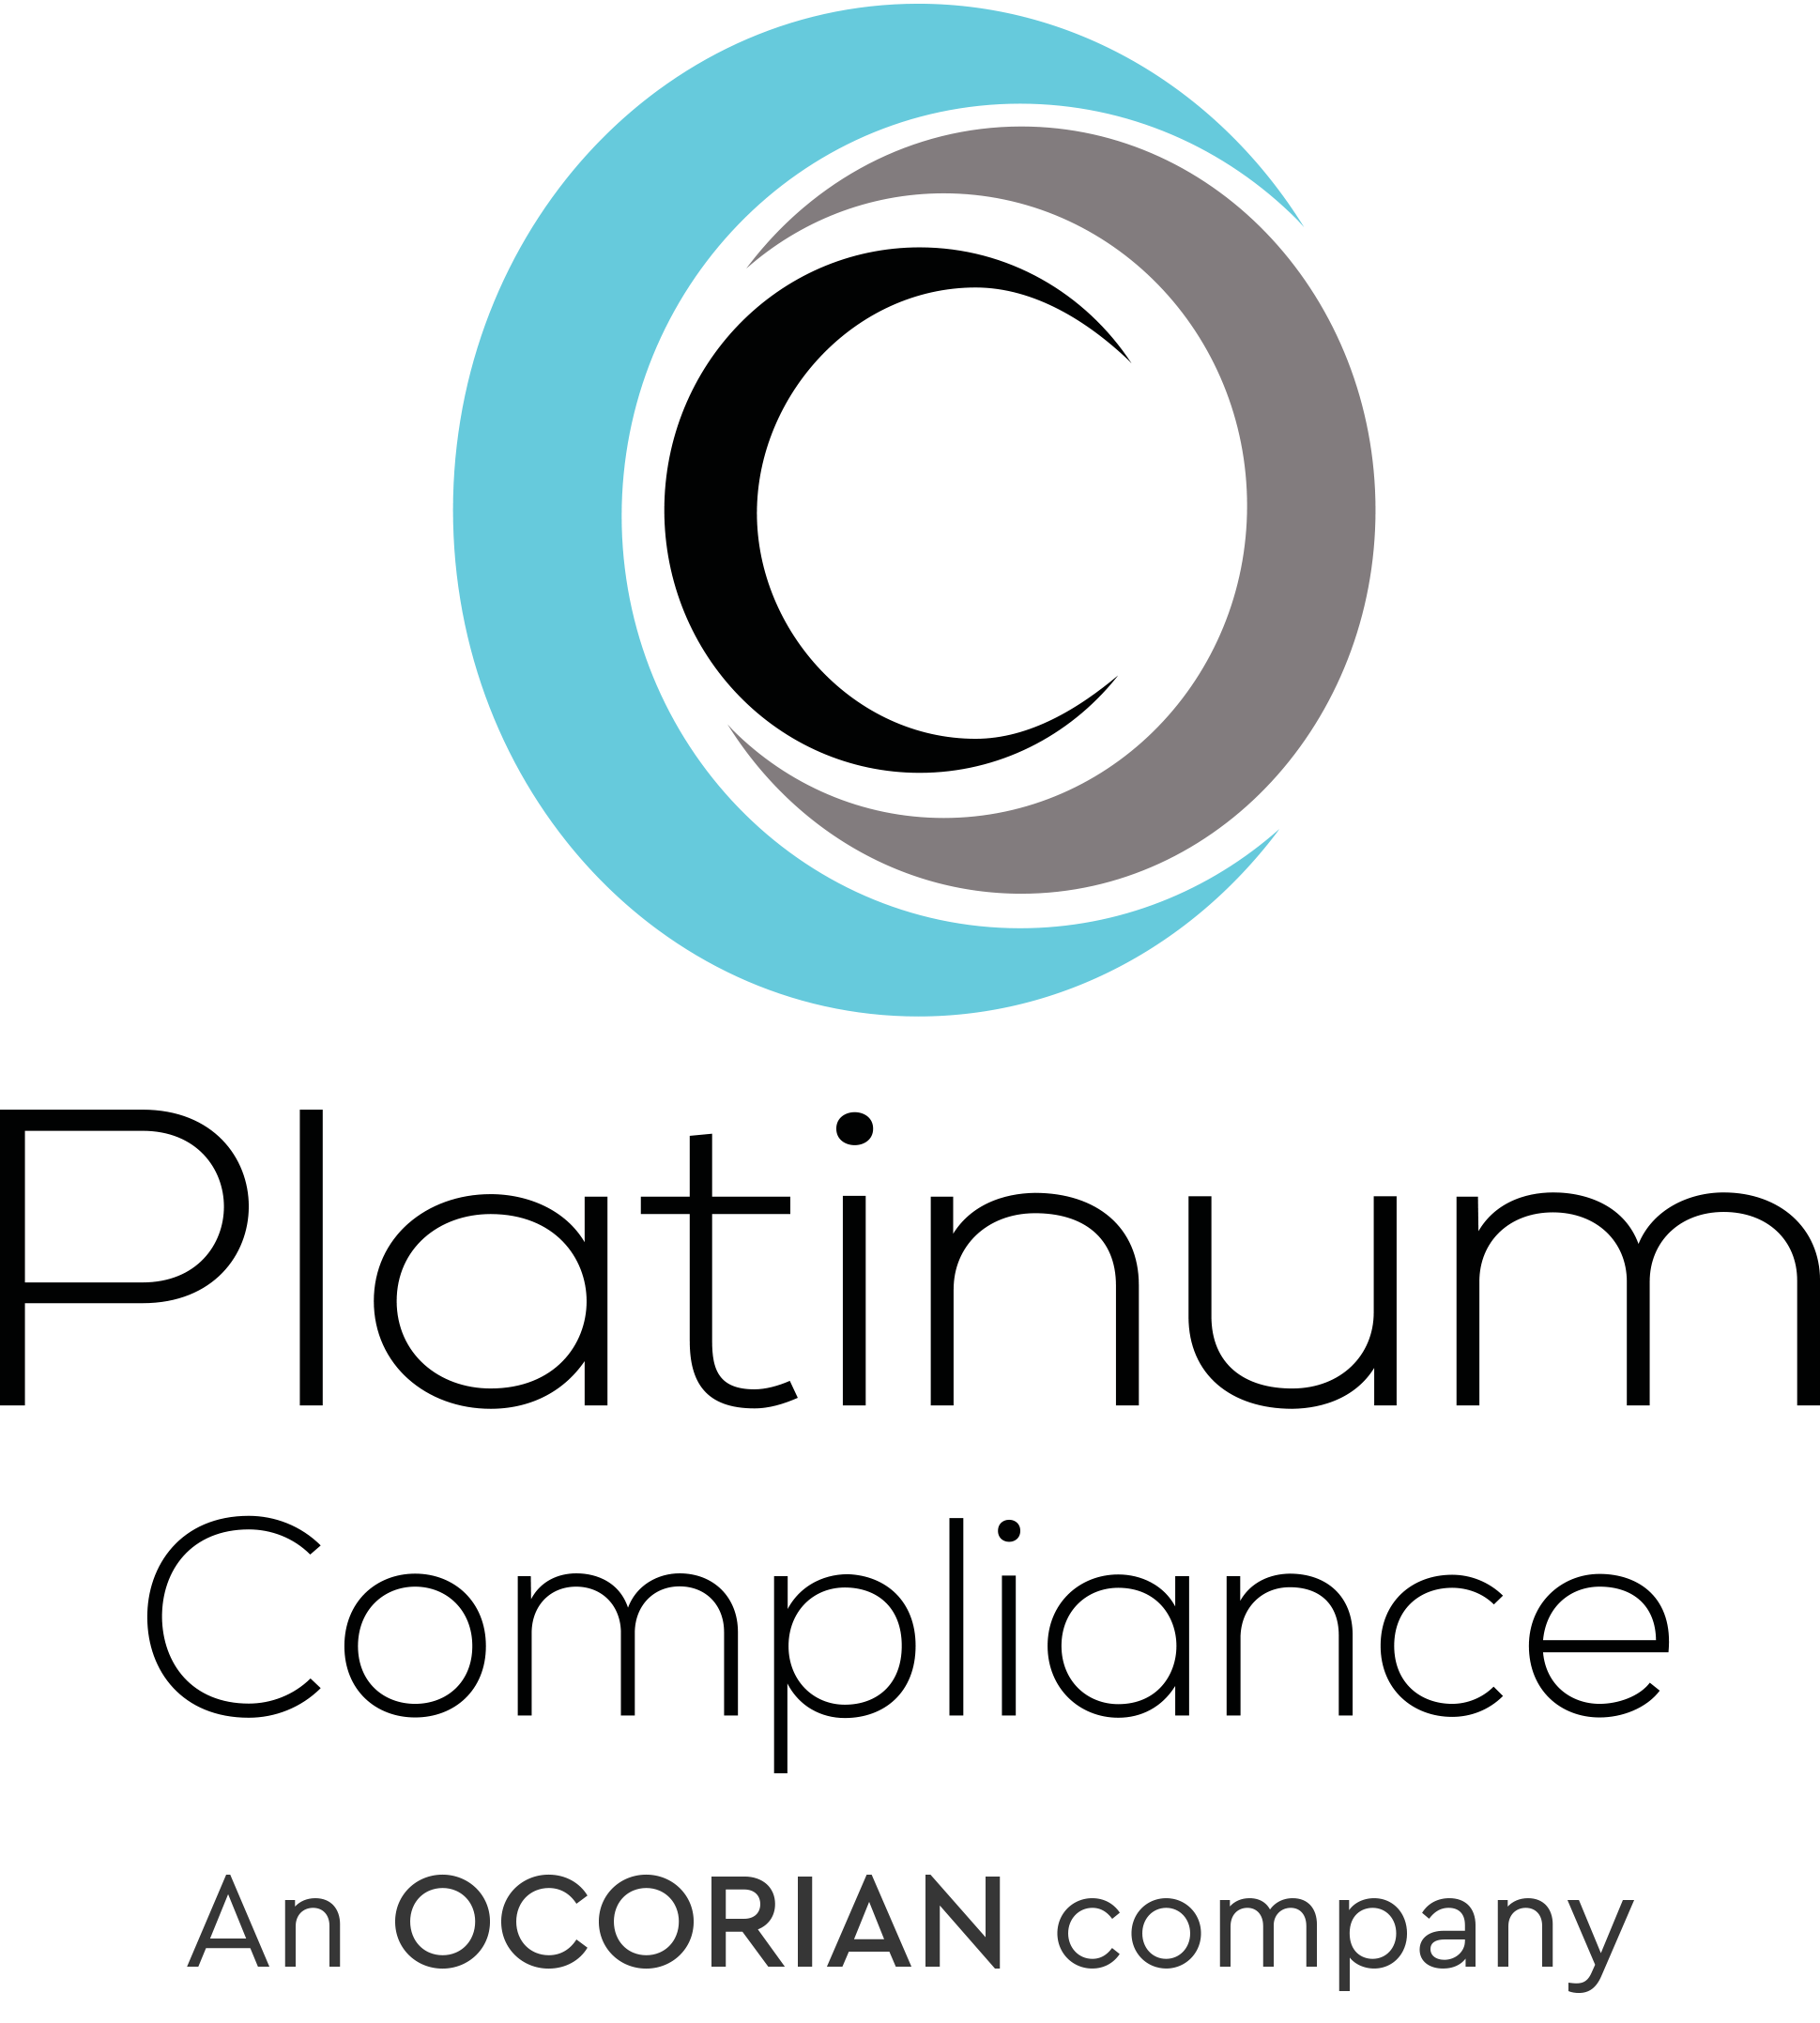 Our compliance brands